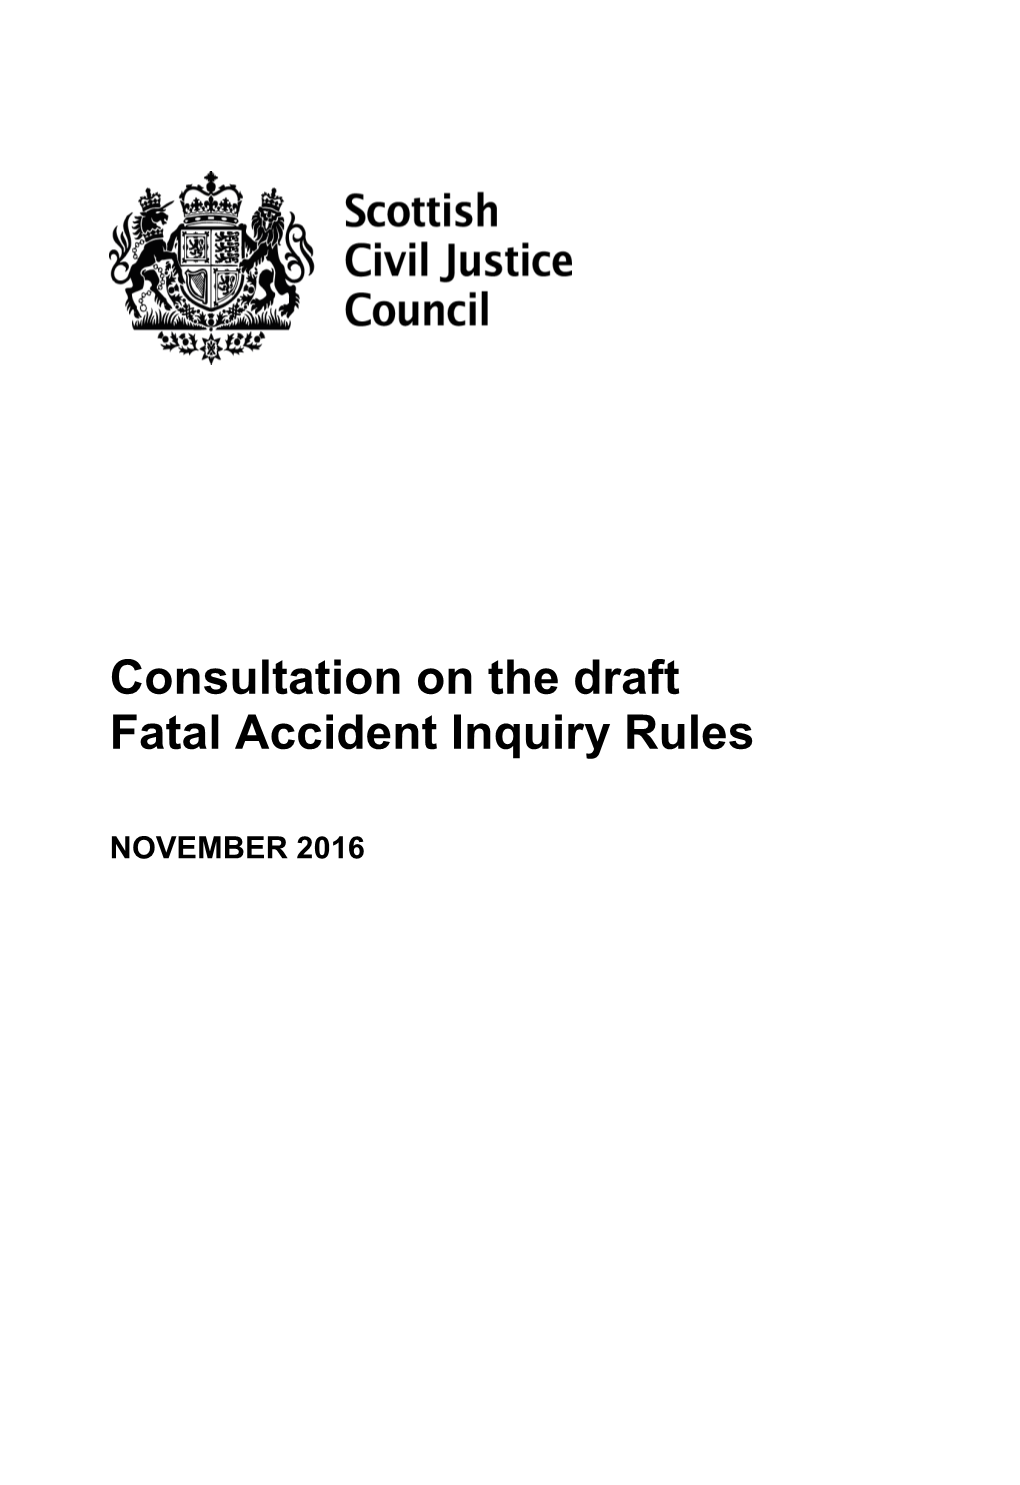 Consultation on the Draft Fatal Accident Inquiry Rules